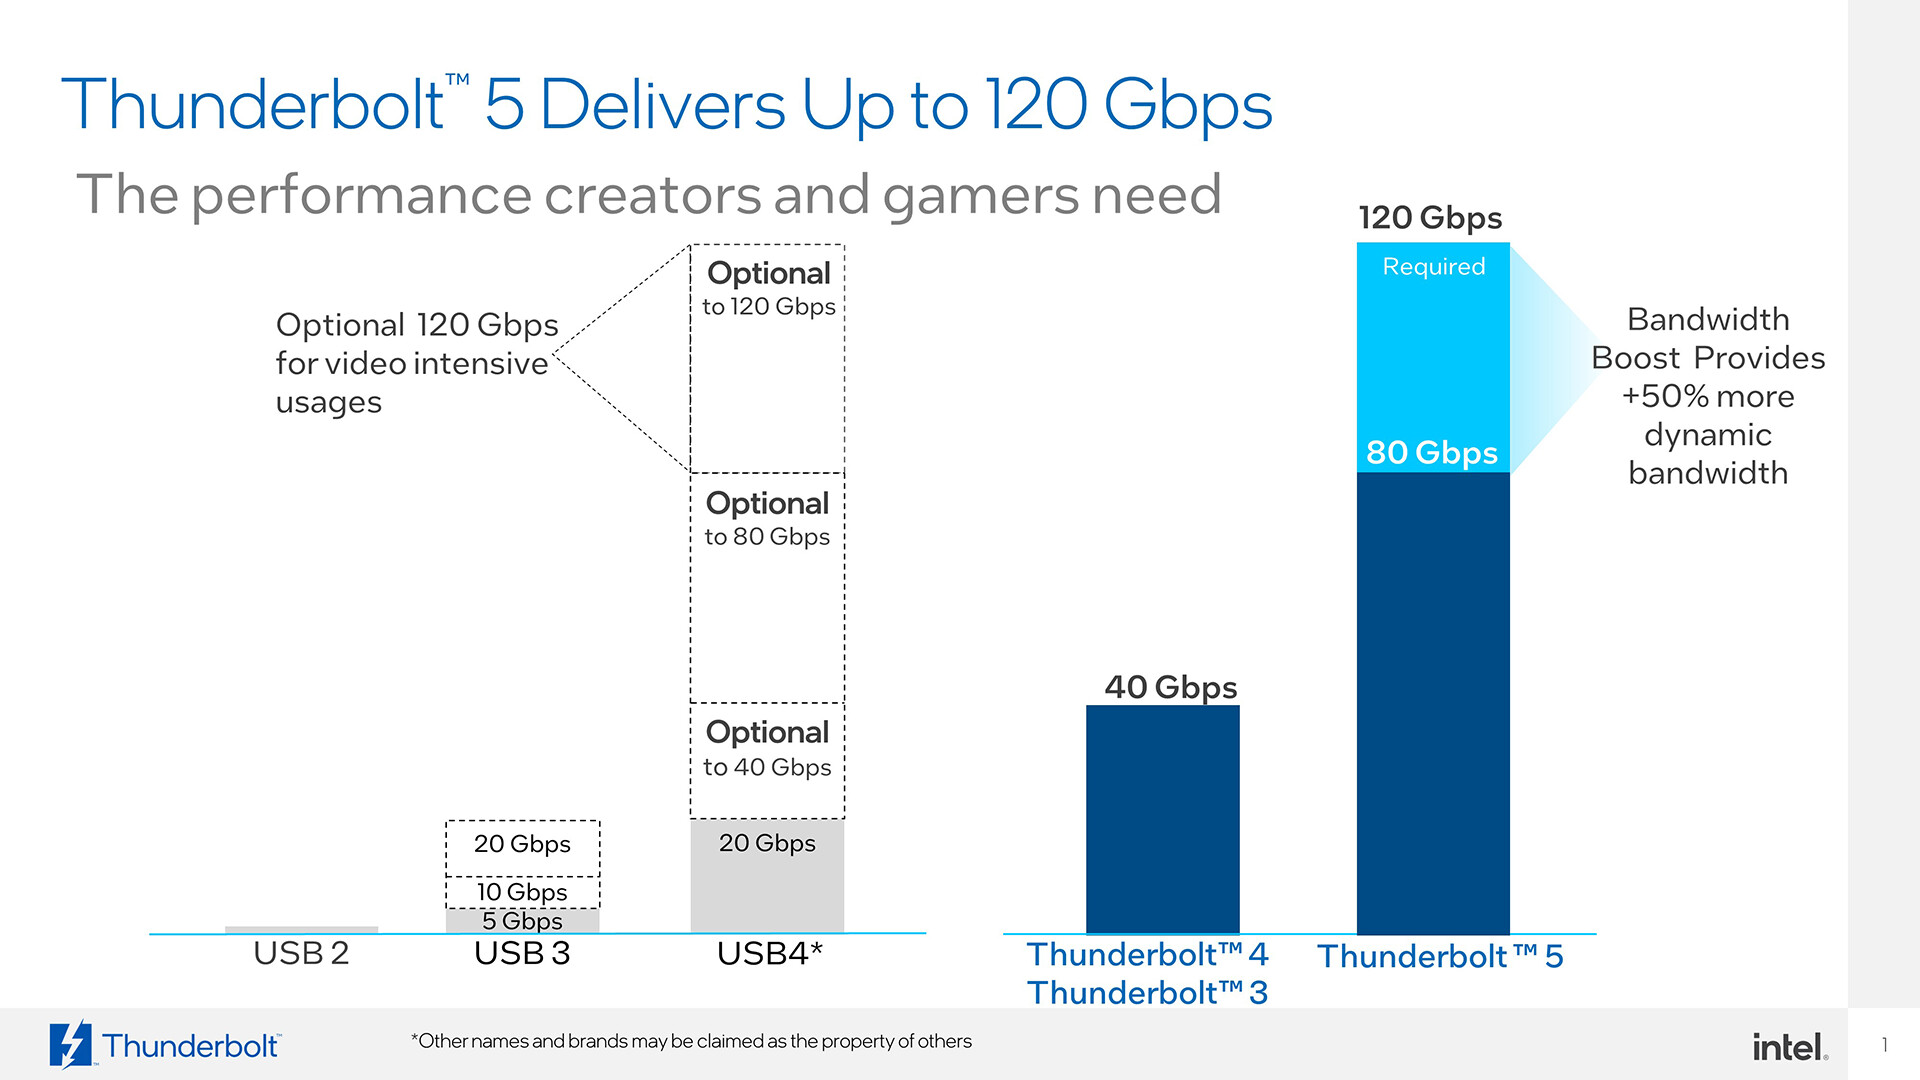 Intel Introduces Thunderbolt 5 Connectivity Standard, Bandwidth up to 120  Gbps